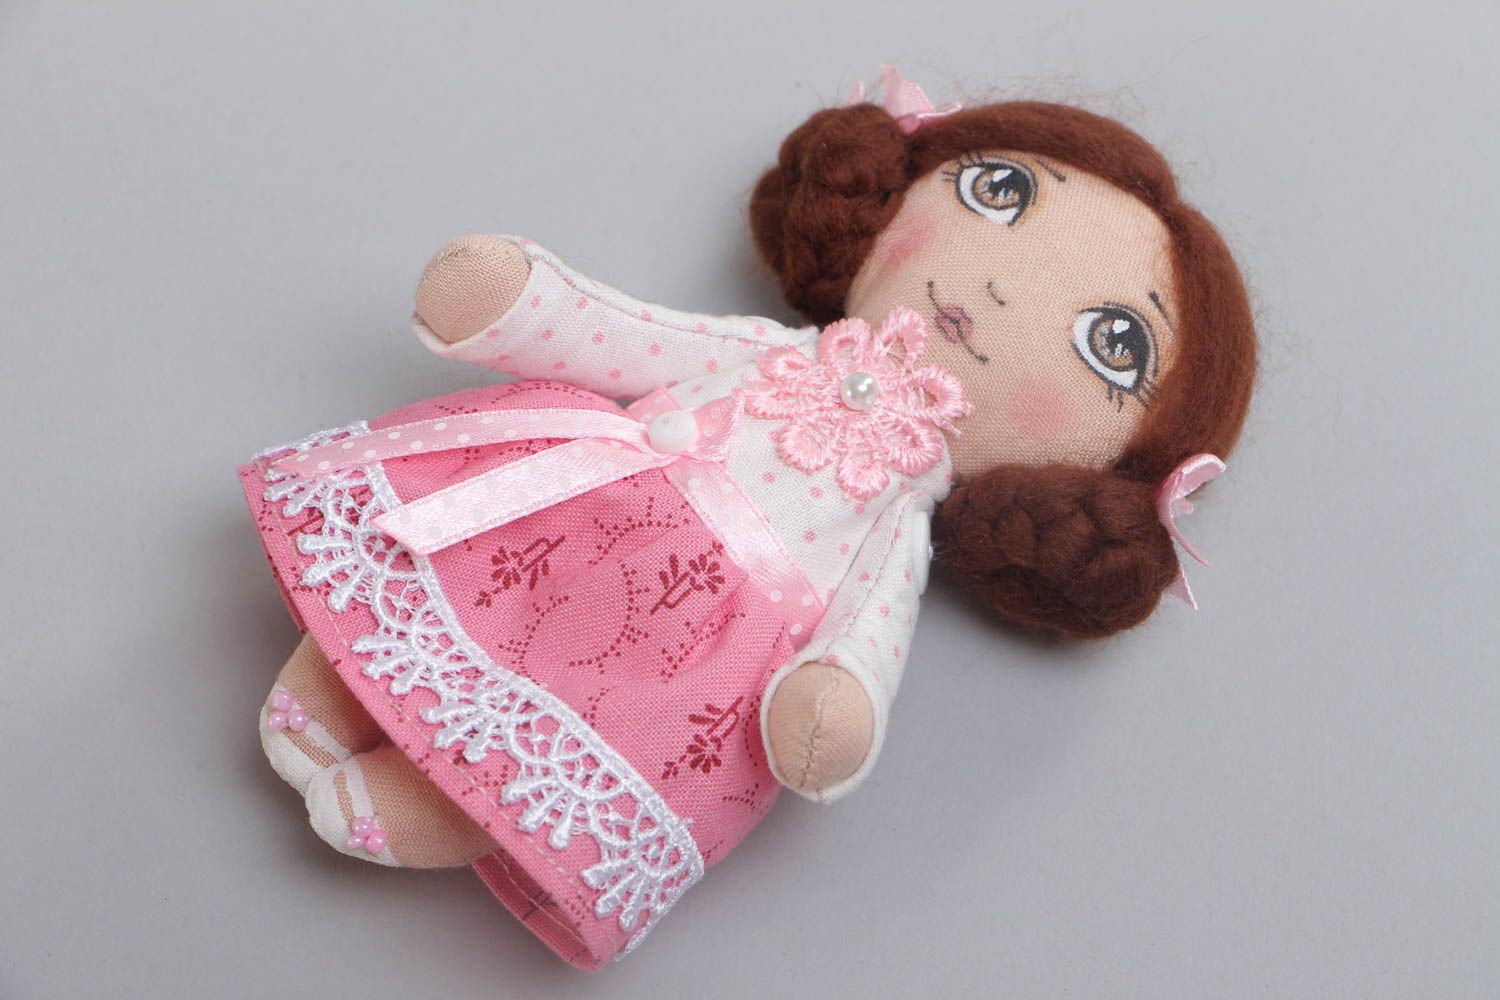 Handcrafted soft beautiful doll in a pink dress for girls made of cotton photo 2